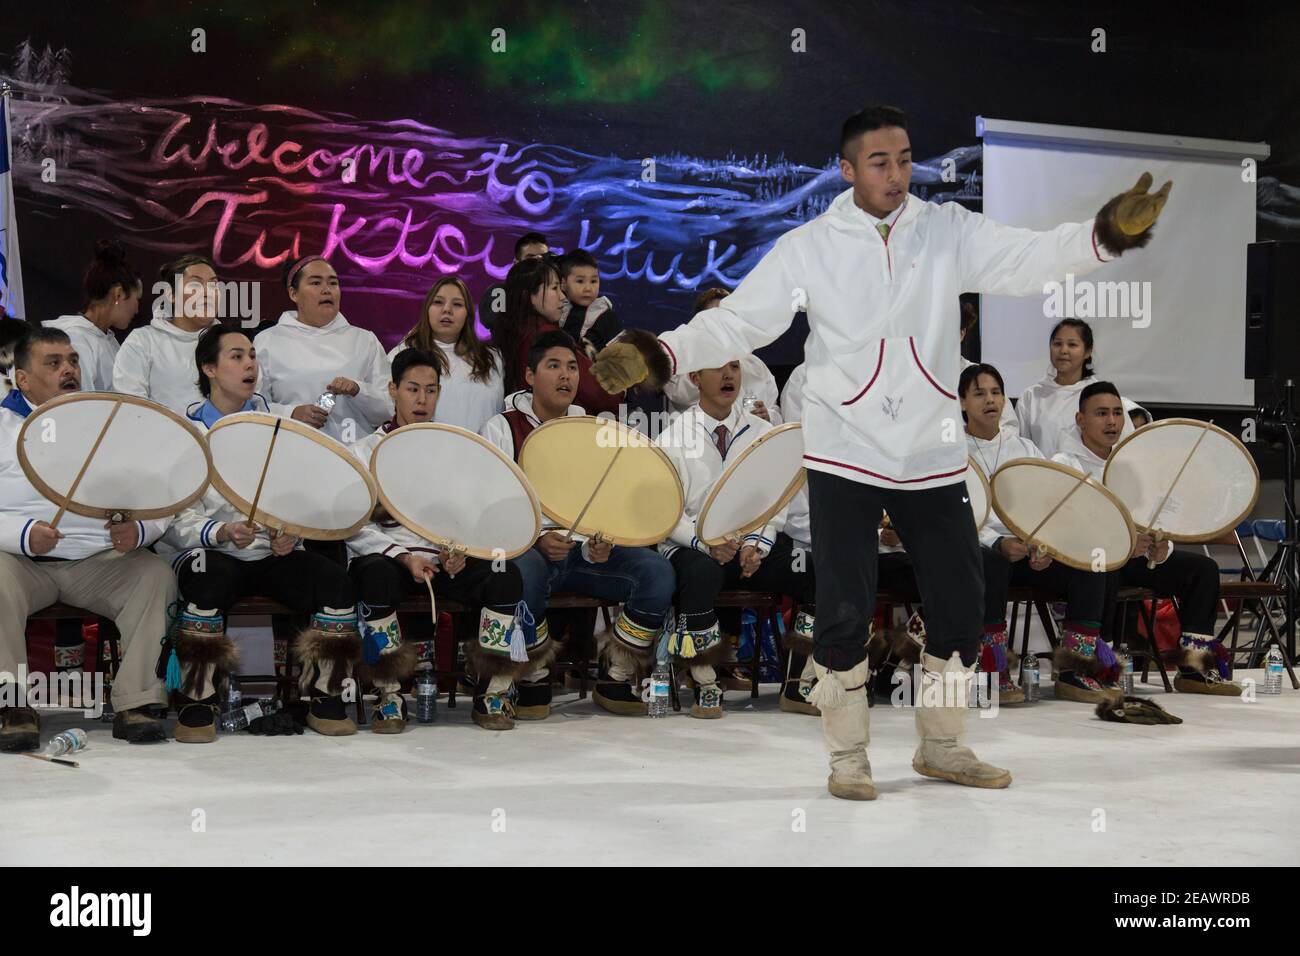 Inuit Siglit Drummers and Dancers of Tuktoyaktuk performing in traditional costume, Northwest Territories, Canada's western Arctic. Stock Photo